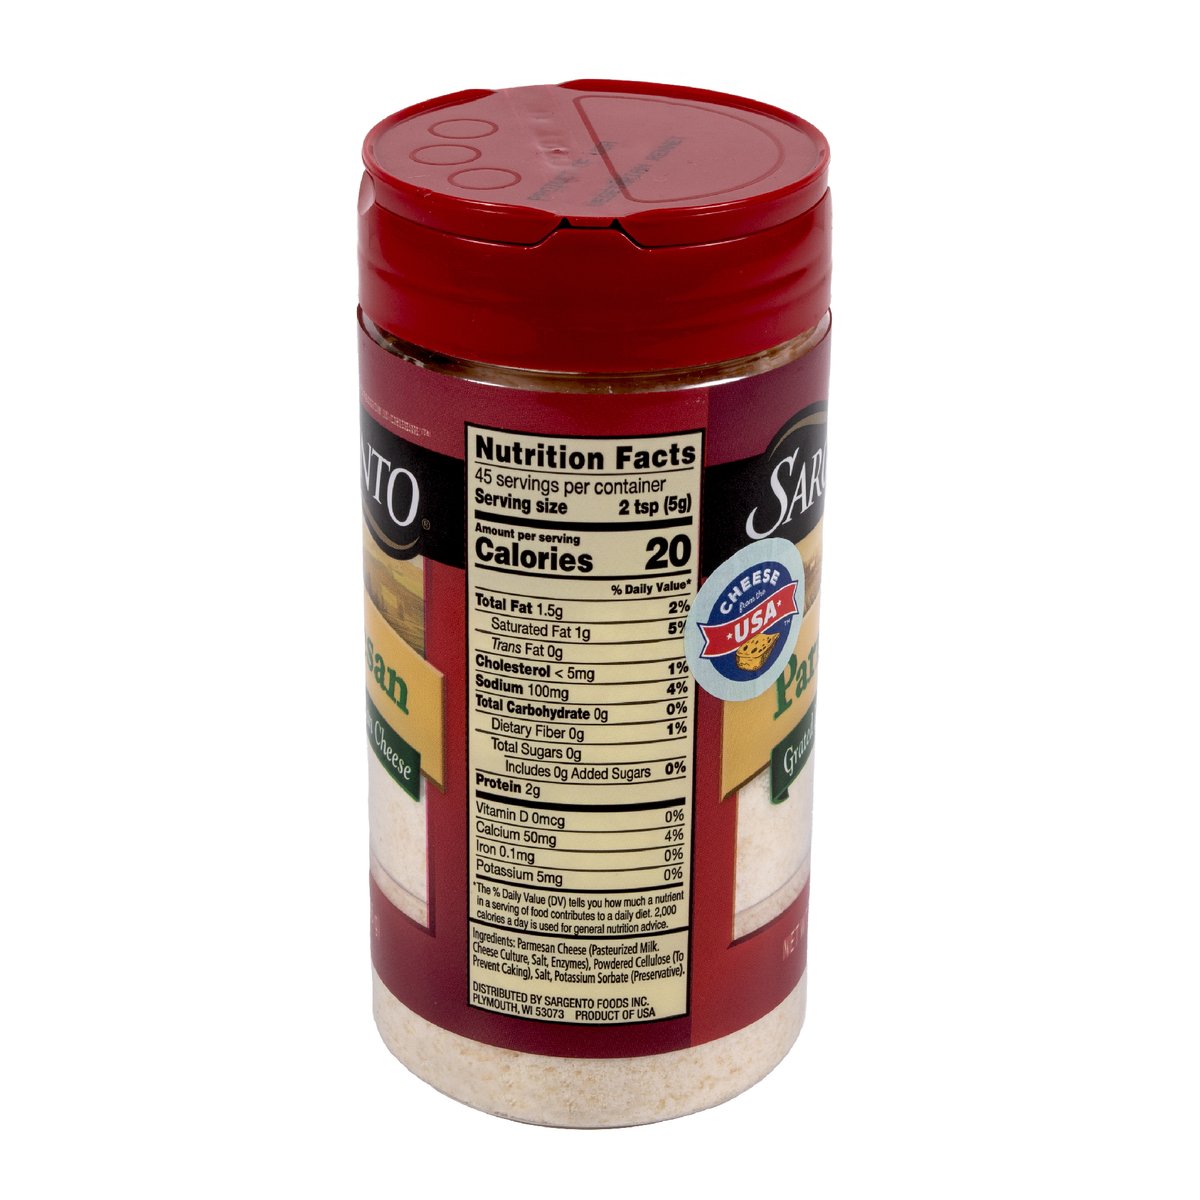 Sargento Grated Parmesan Cheese 226 g